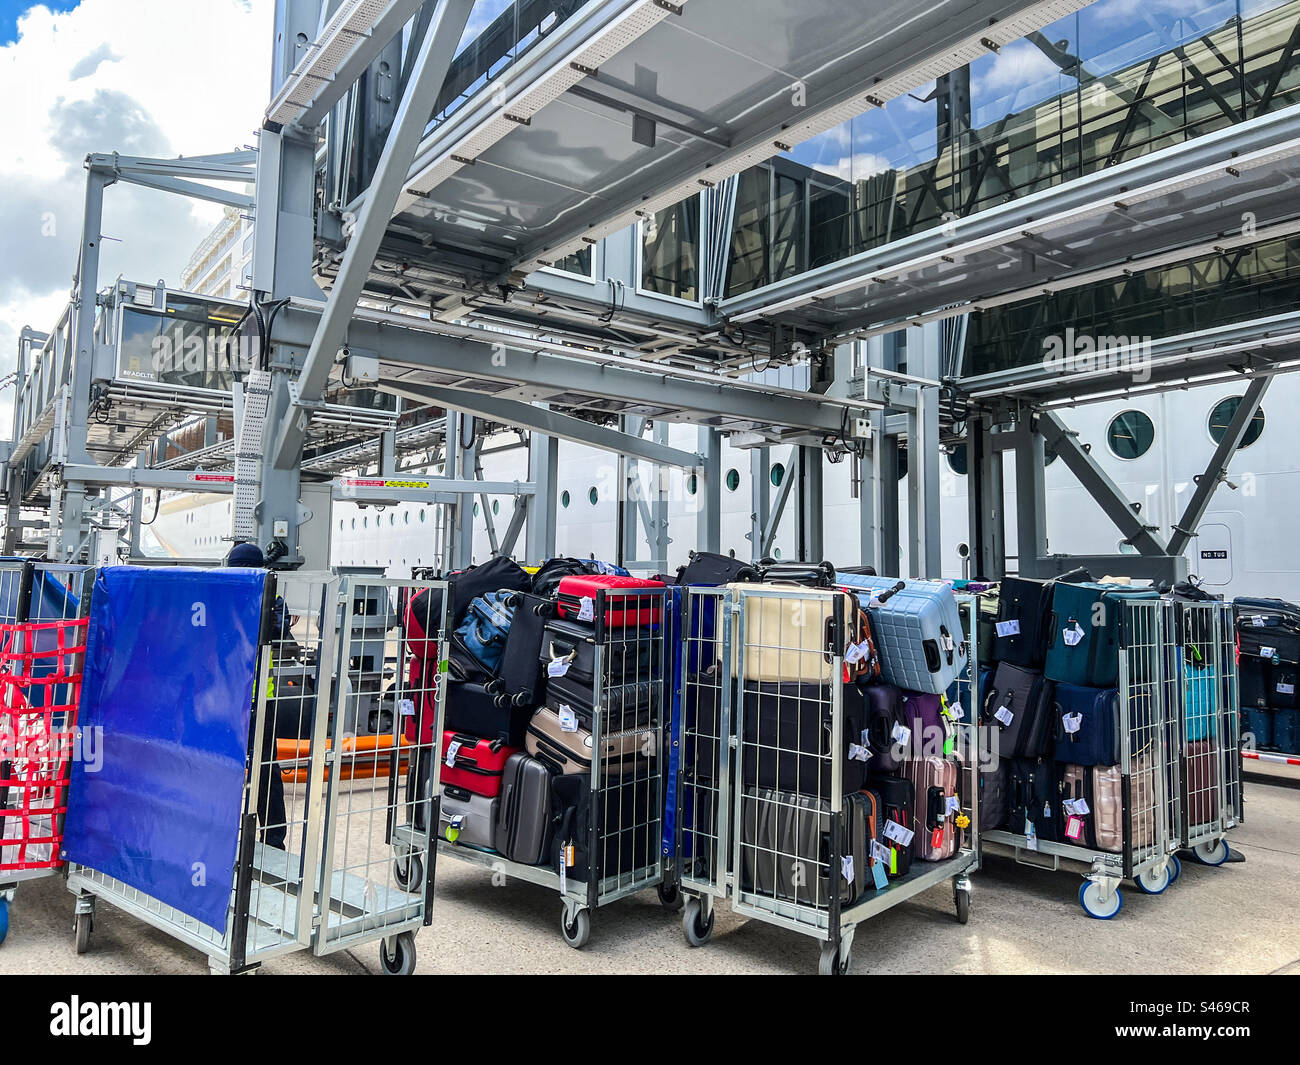 Containers loaded with luggage and suitcases boarding a large cruise ship Stock Photo